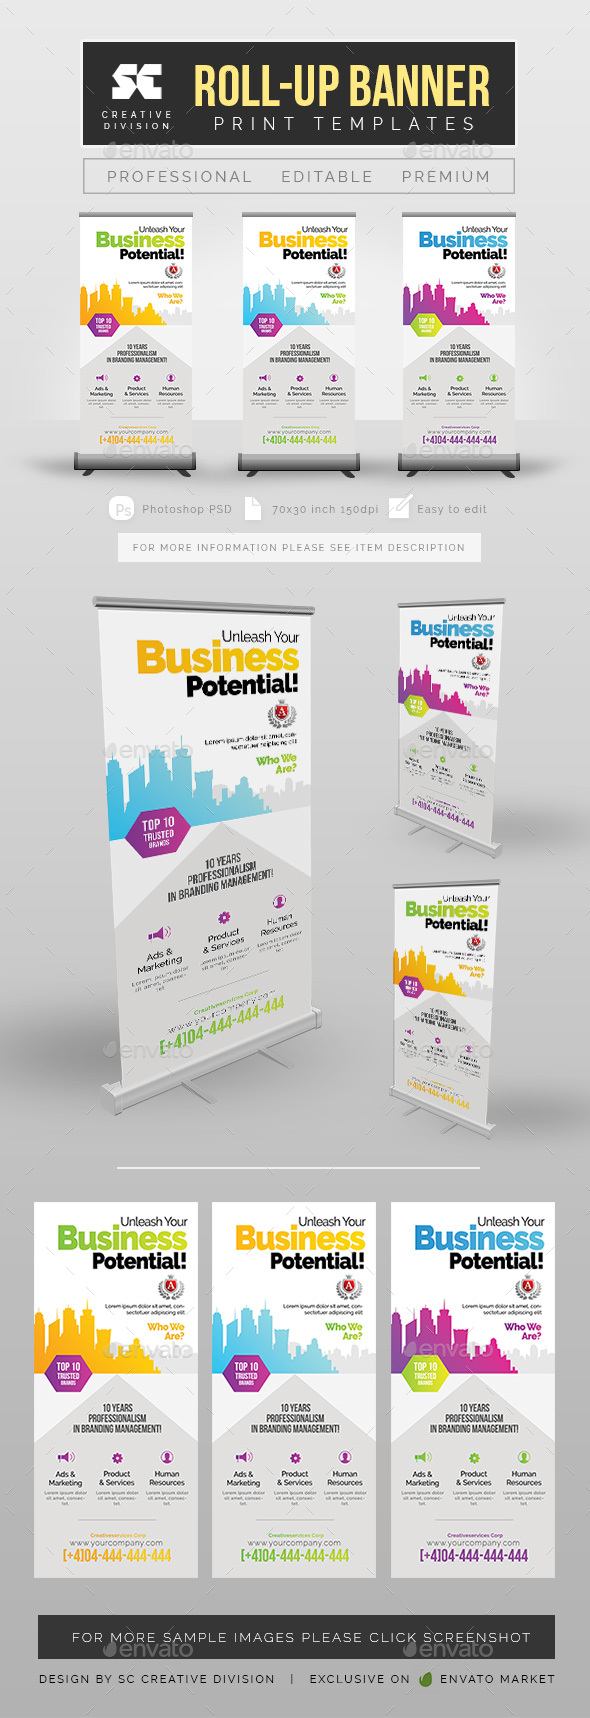 Corporate Roll Up Banner in Signage Templates